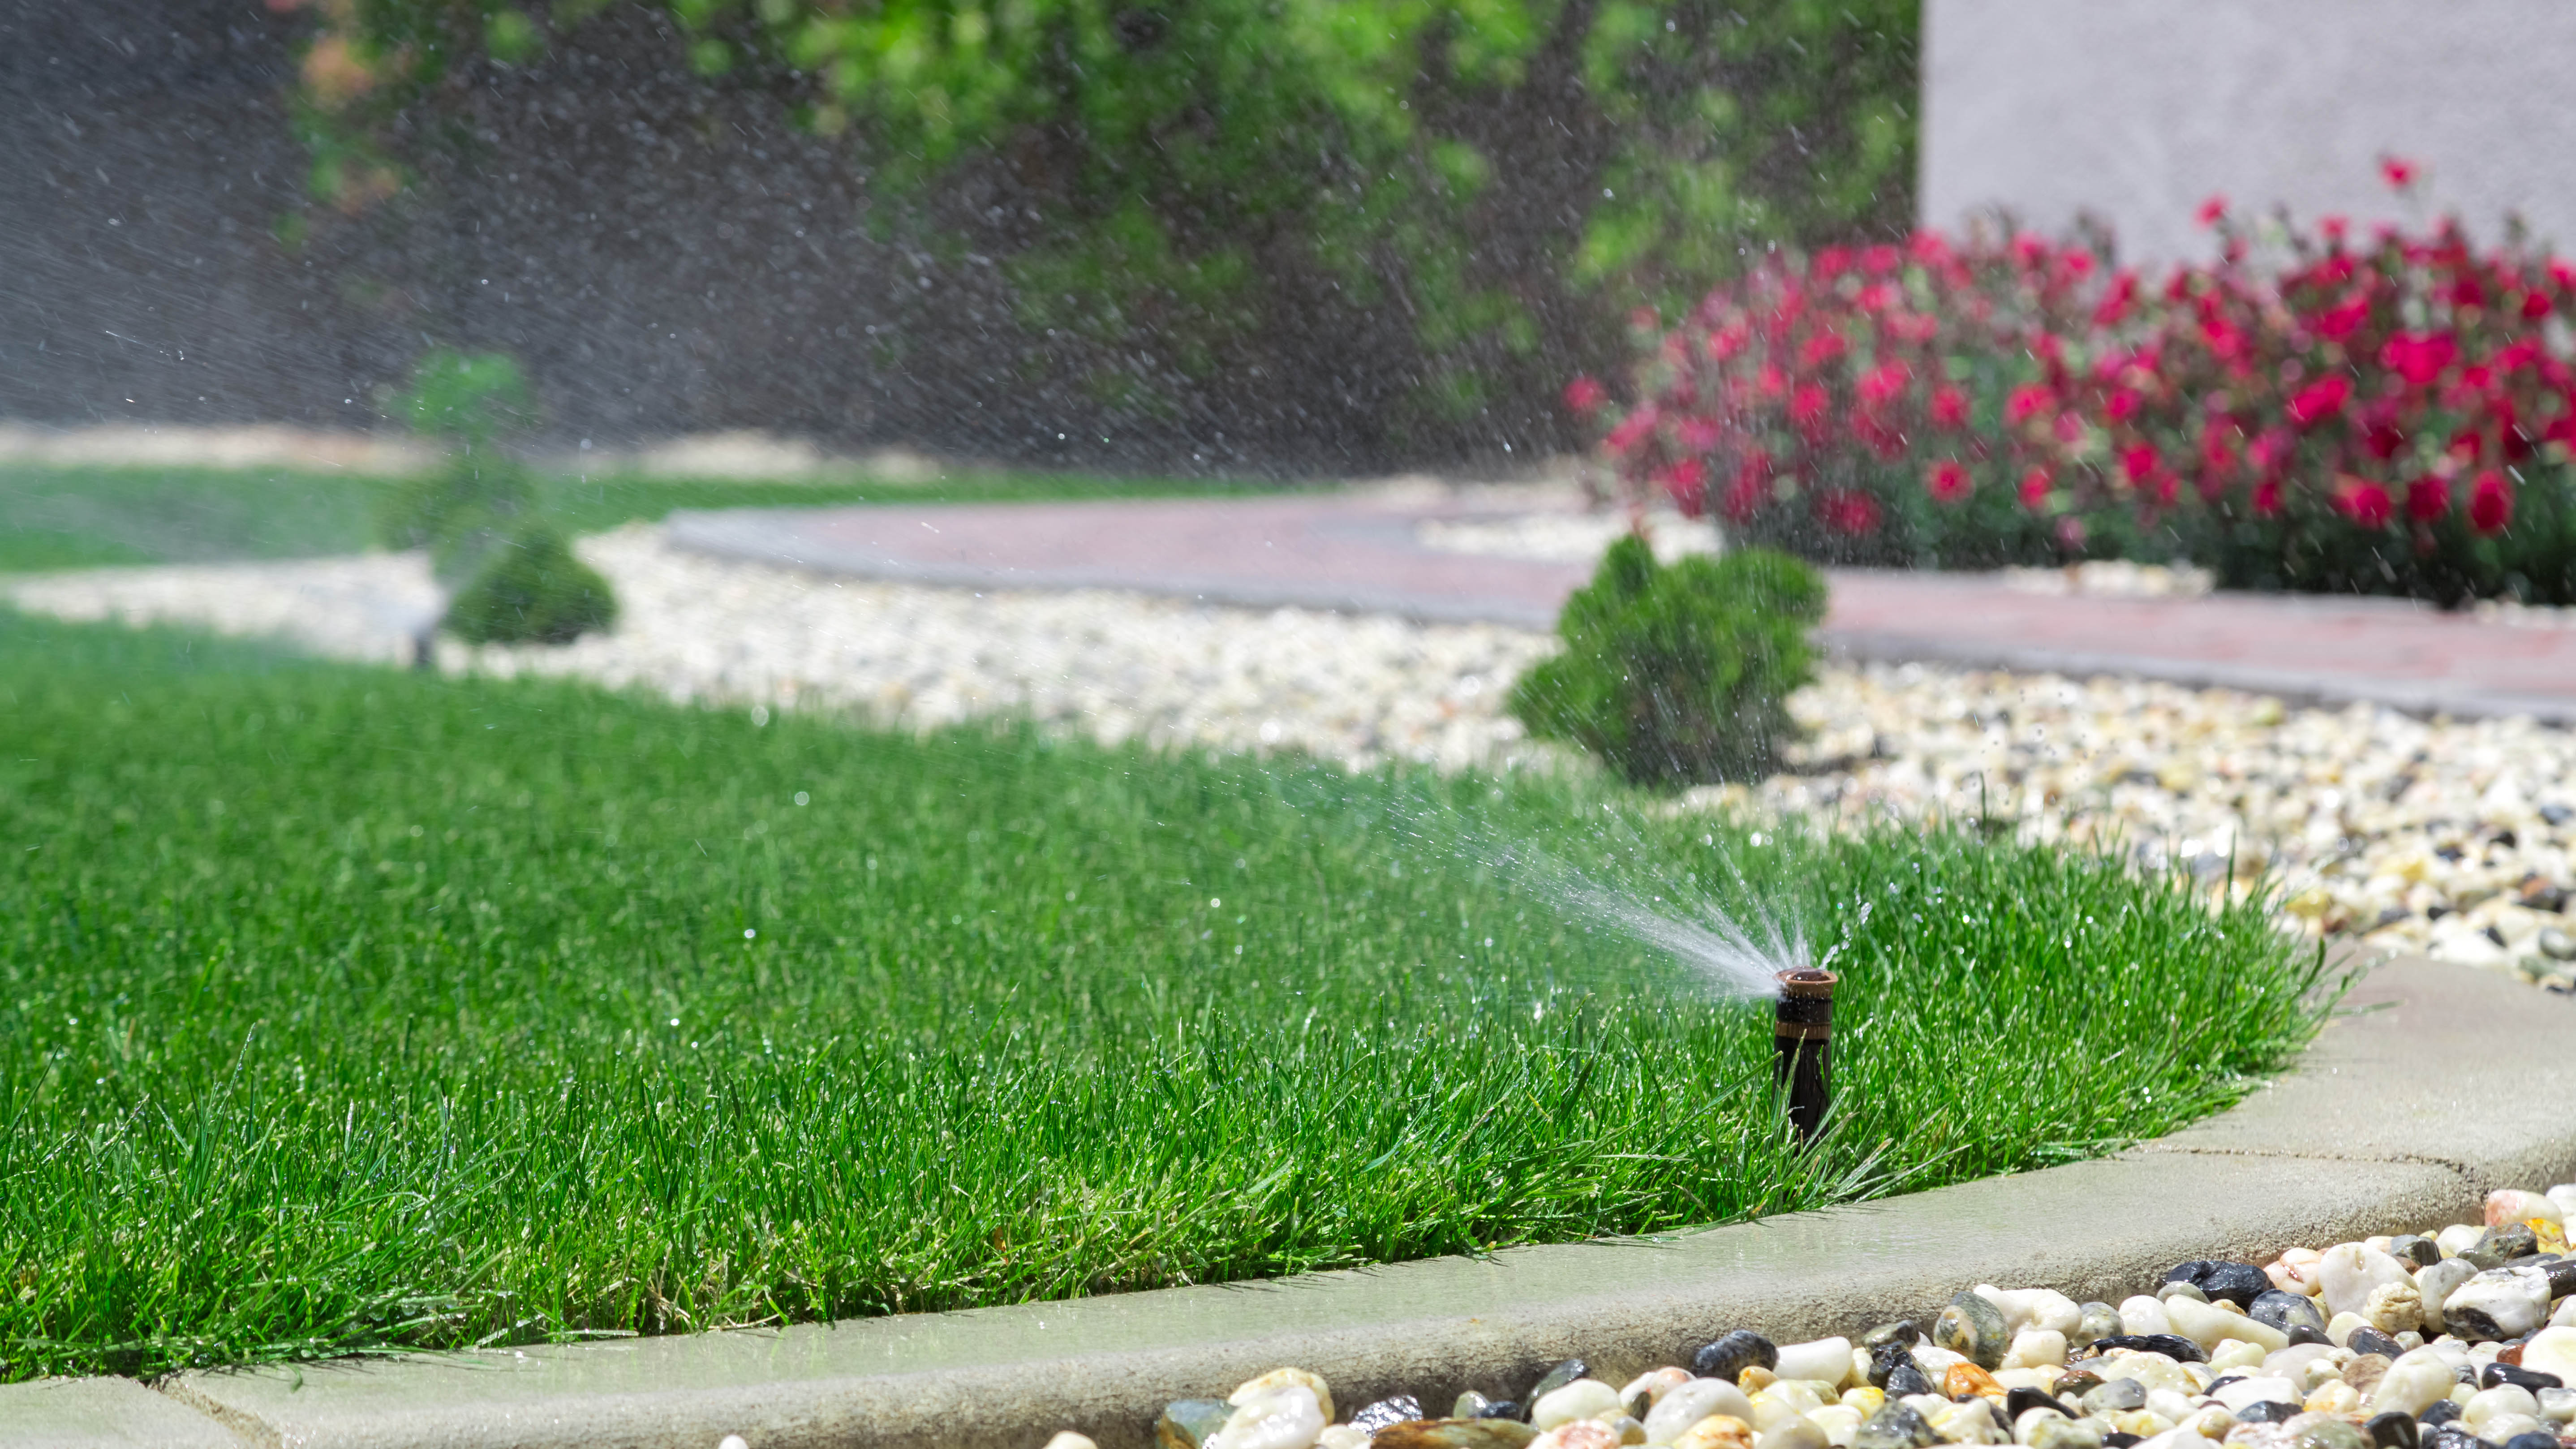 A sprinkler system running at the edge of a lawn